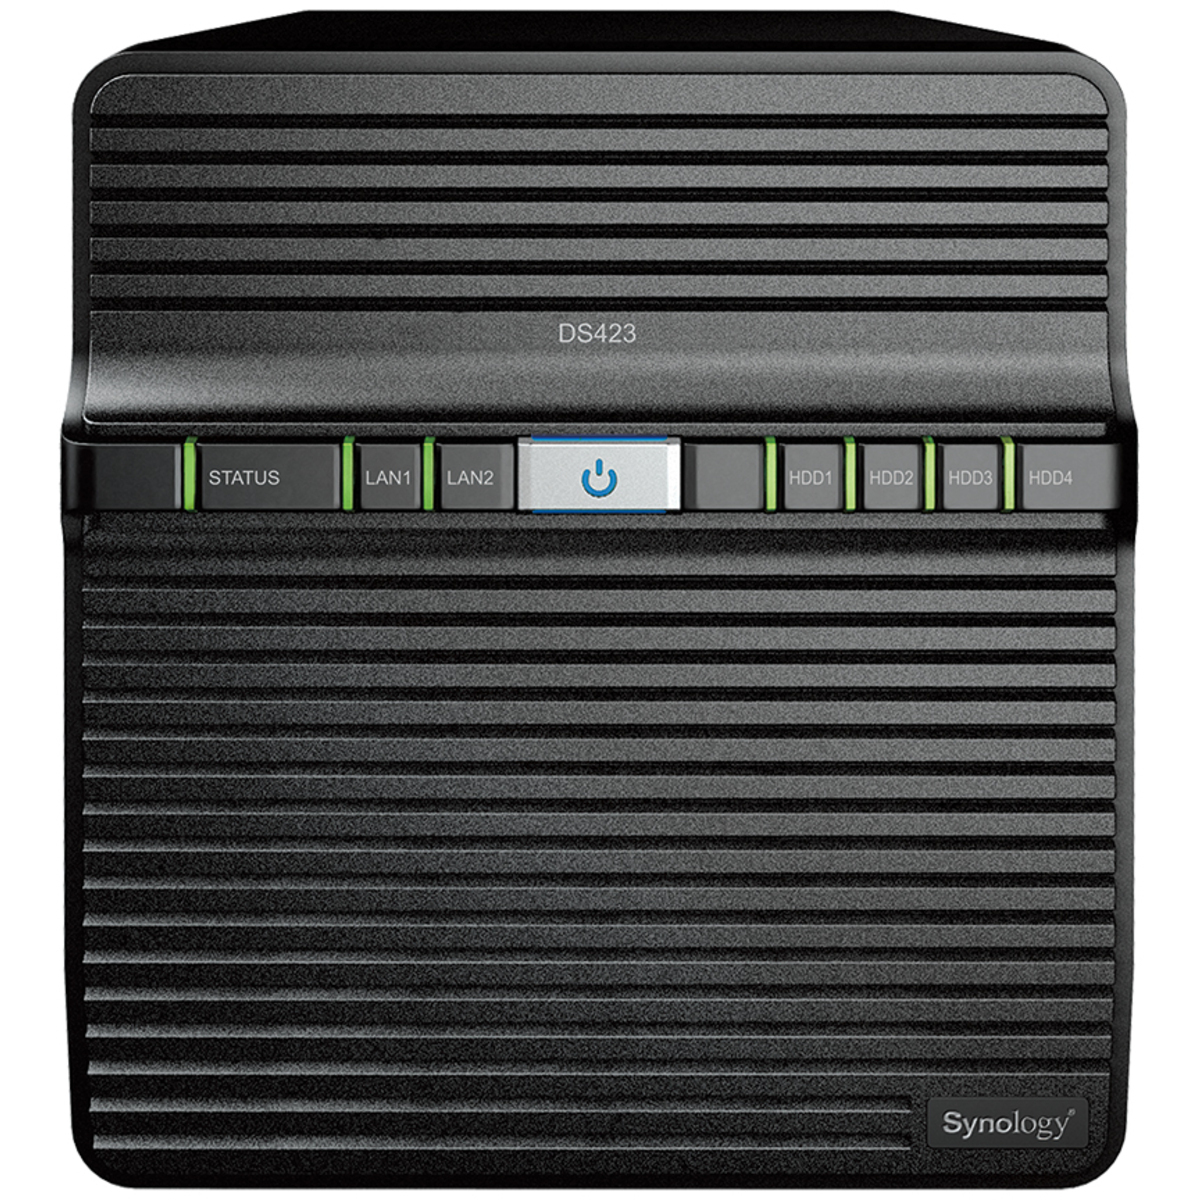 Synology DiskStation DS423 42tb 4-Bay Desktop Personal / Basic Home / Small Office NAS - Network Attached Storage Device 3x14tb Western Digital Ultrastar DC HC530 WUH721414ALE6L4 3.5 7200rpm SATA 6Gb/s HDD ENTERPRISE Class Drives Installed - Burn-In Tested DiskStation DS423